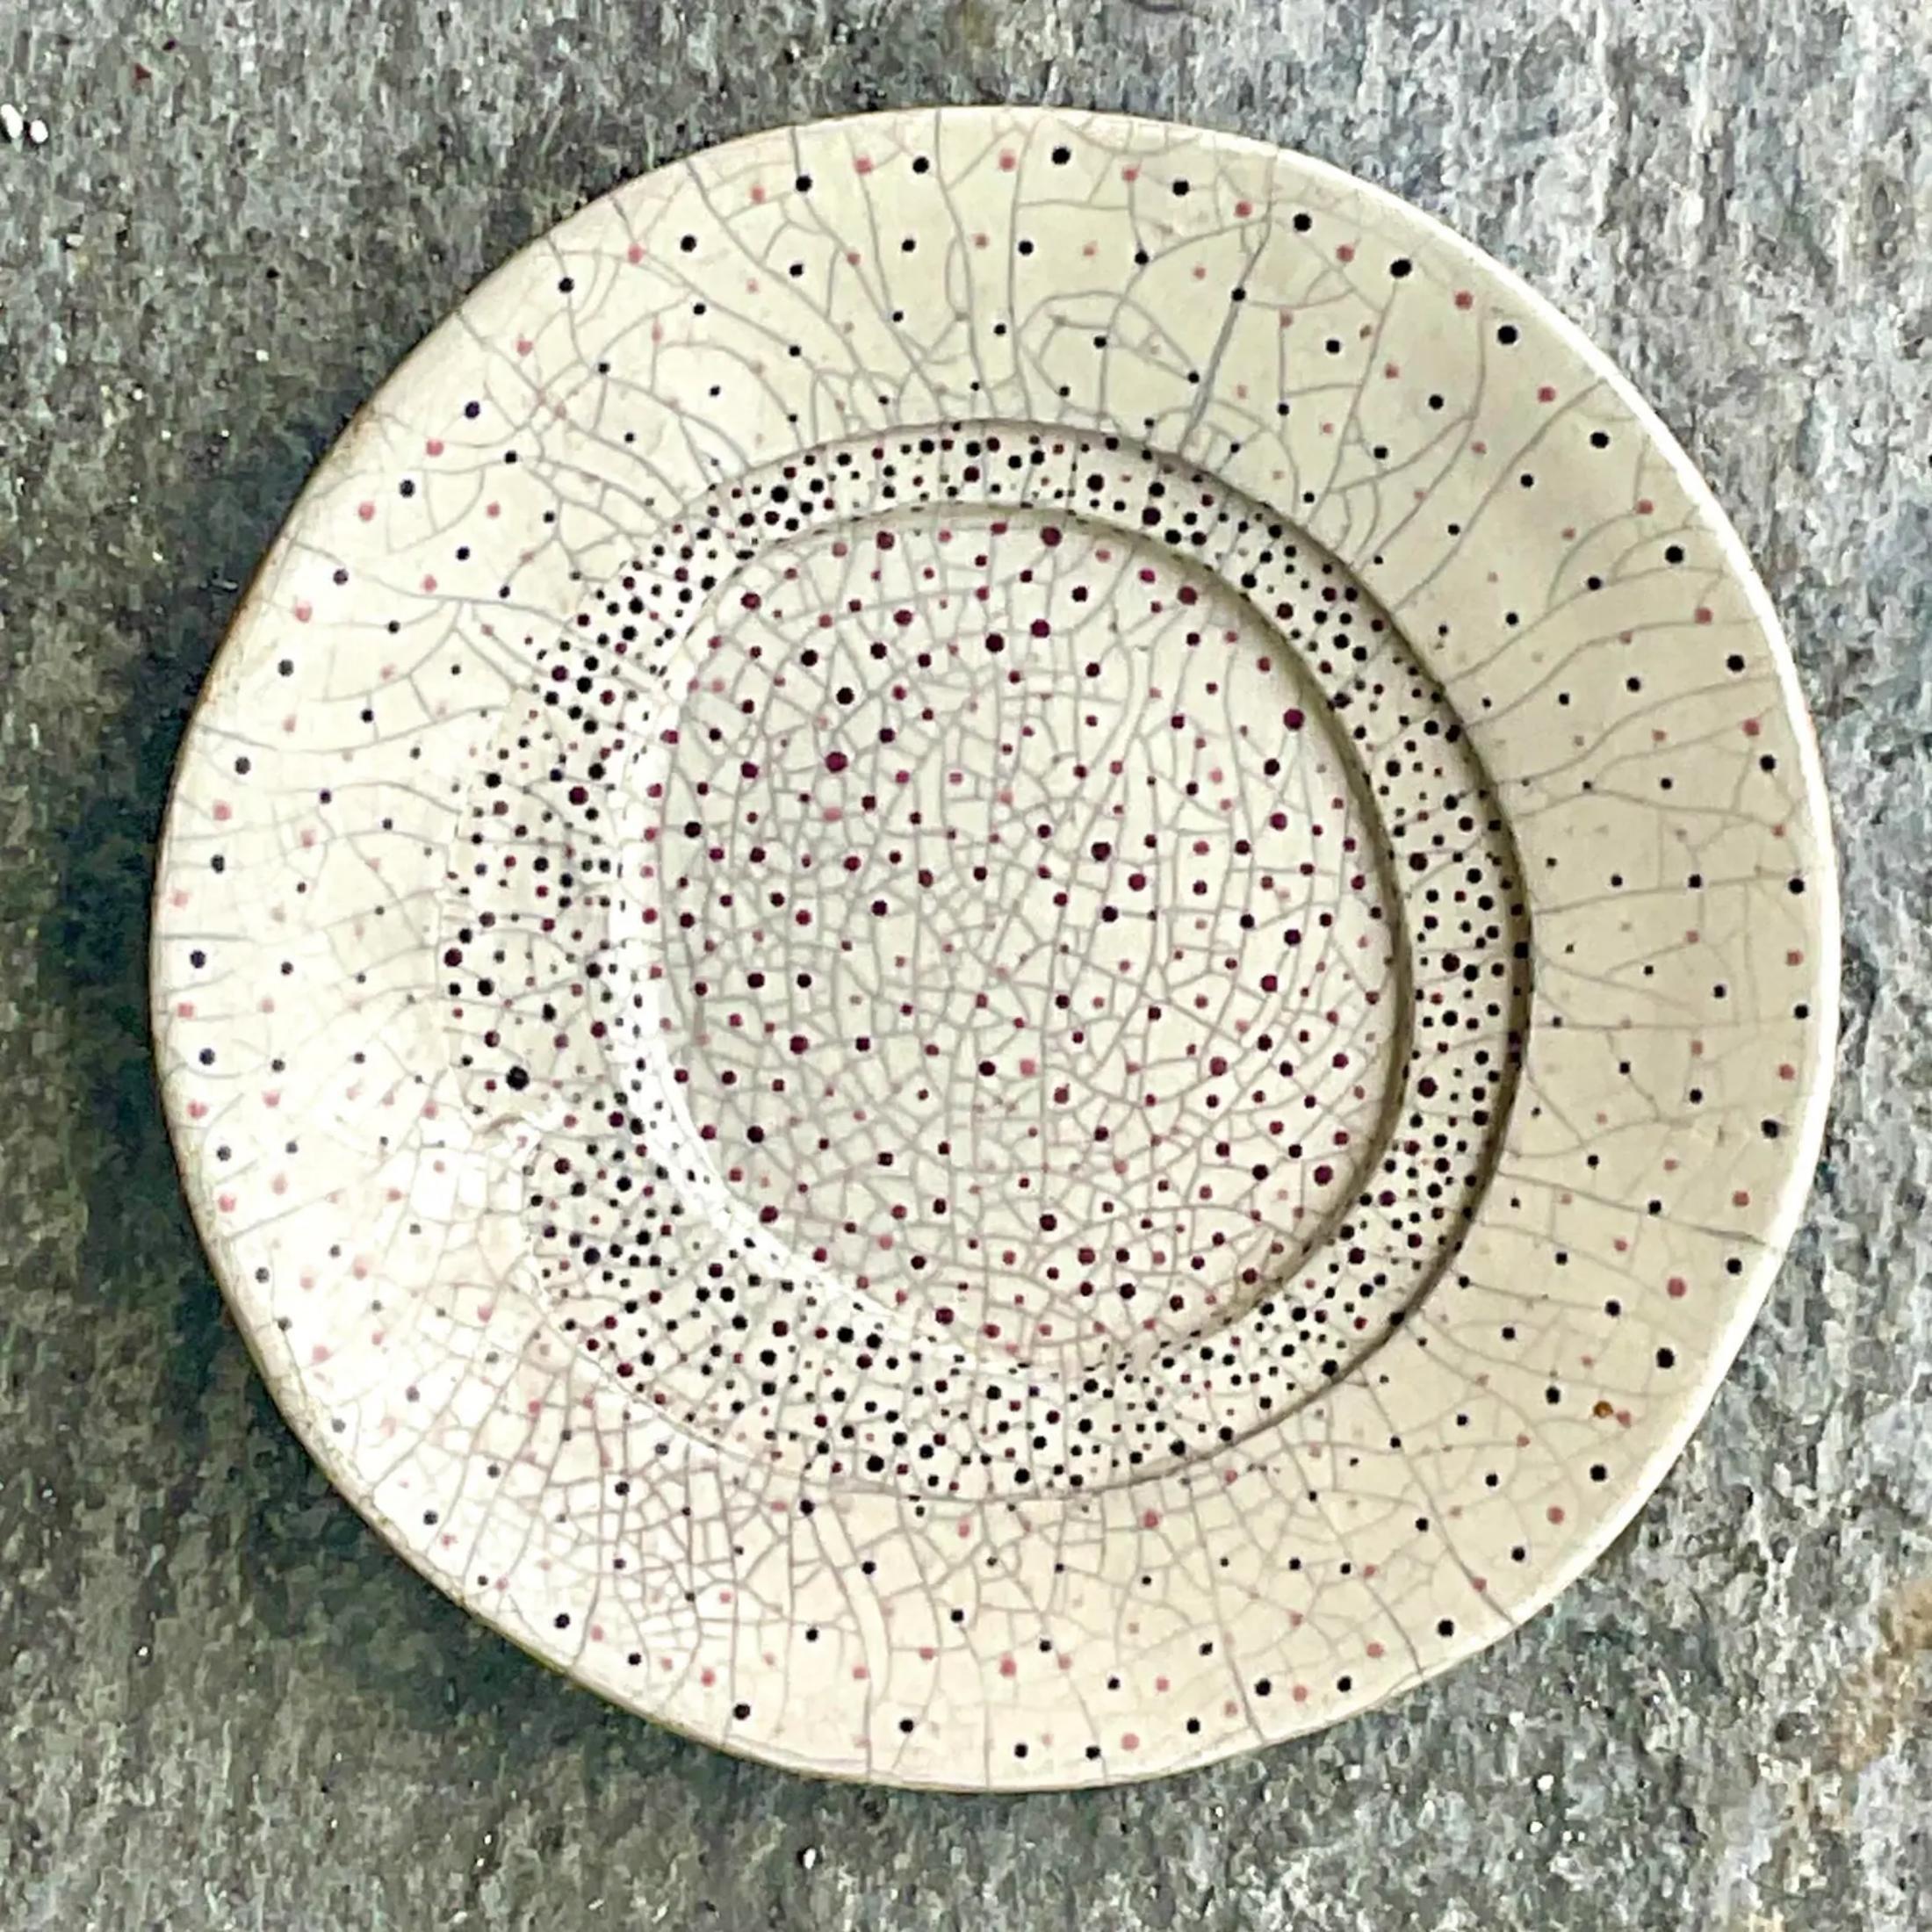 A fabulous vintage studio pottery plate. Beautiful slab built form with hand painted small dot detail. Beautiful coloration in the design. Acquired from a Palm Beach estate